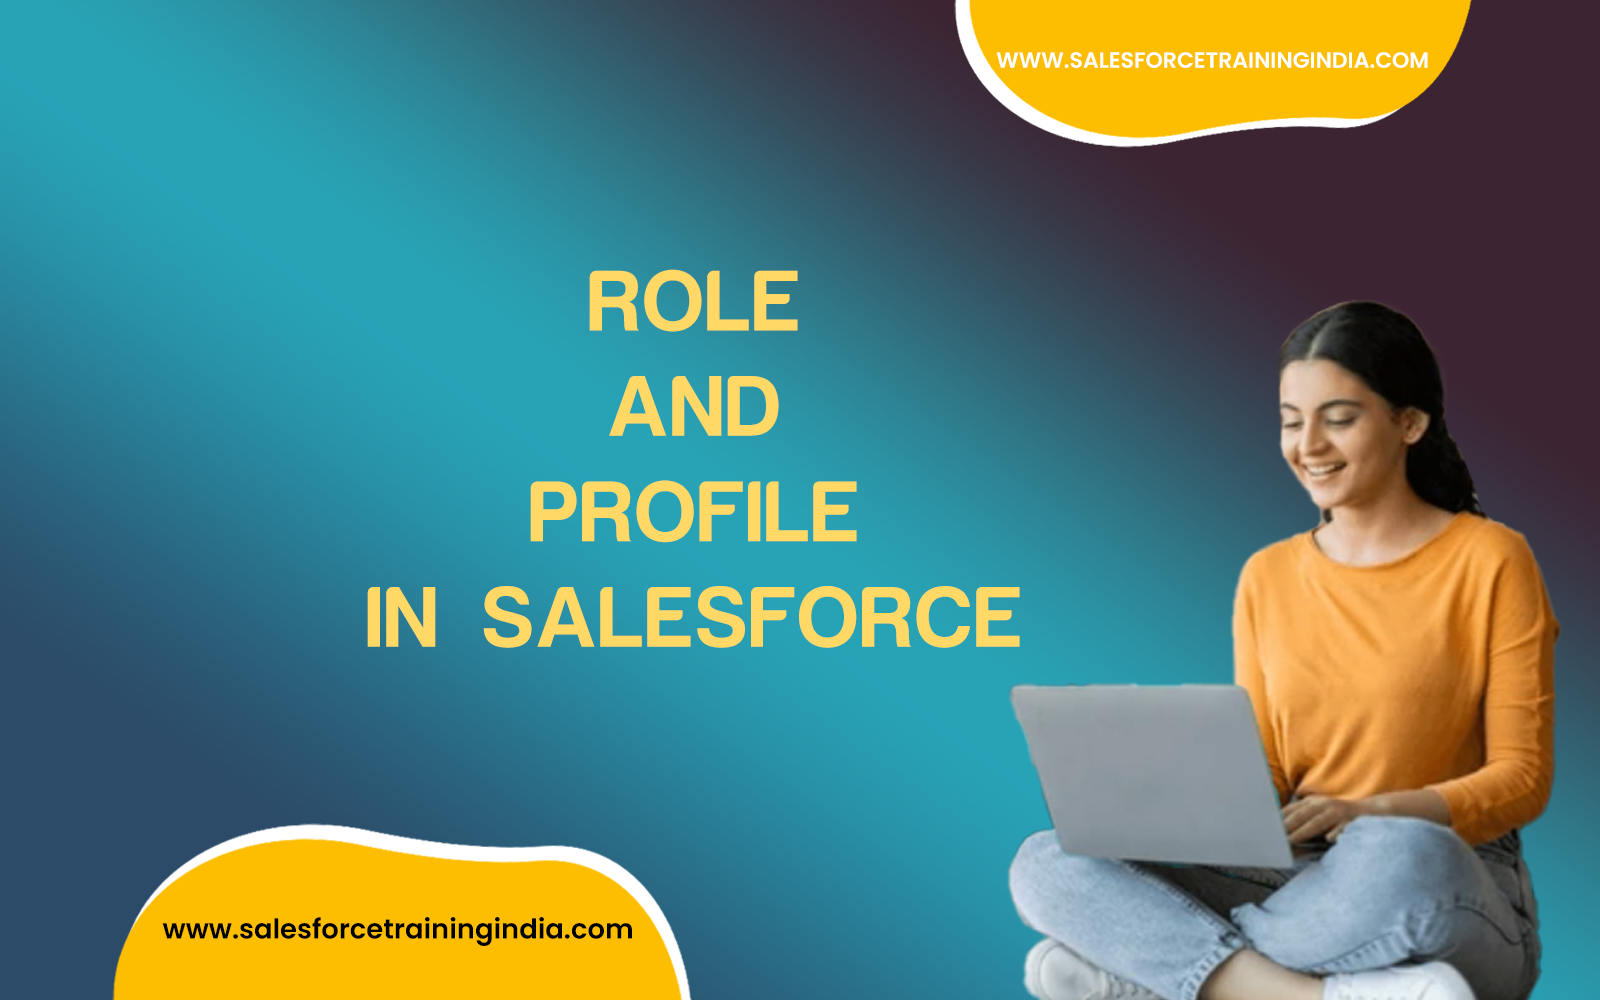 Role and a profile in Salesforce